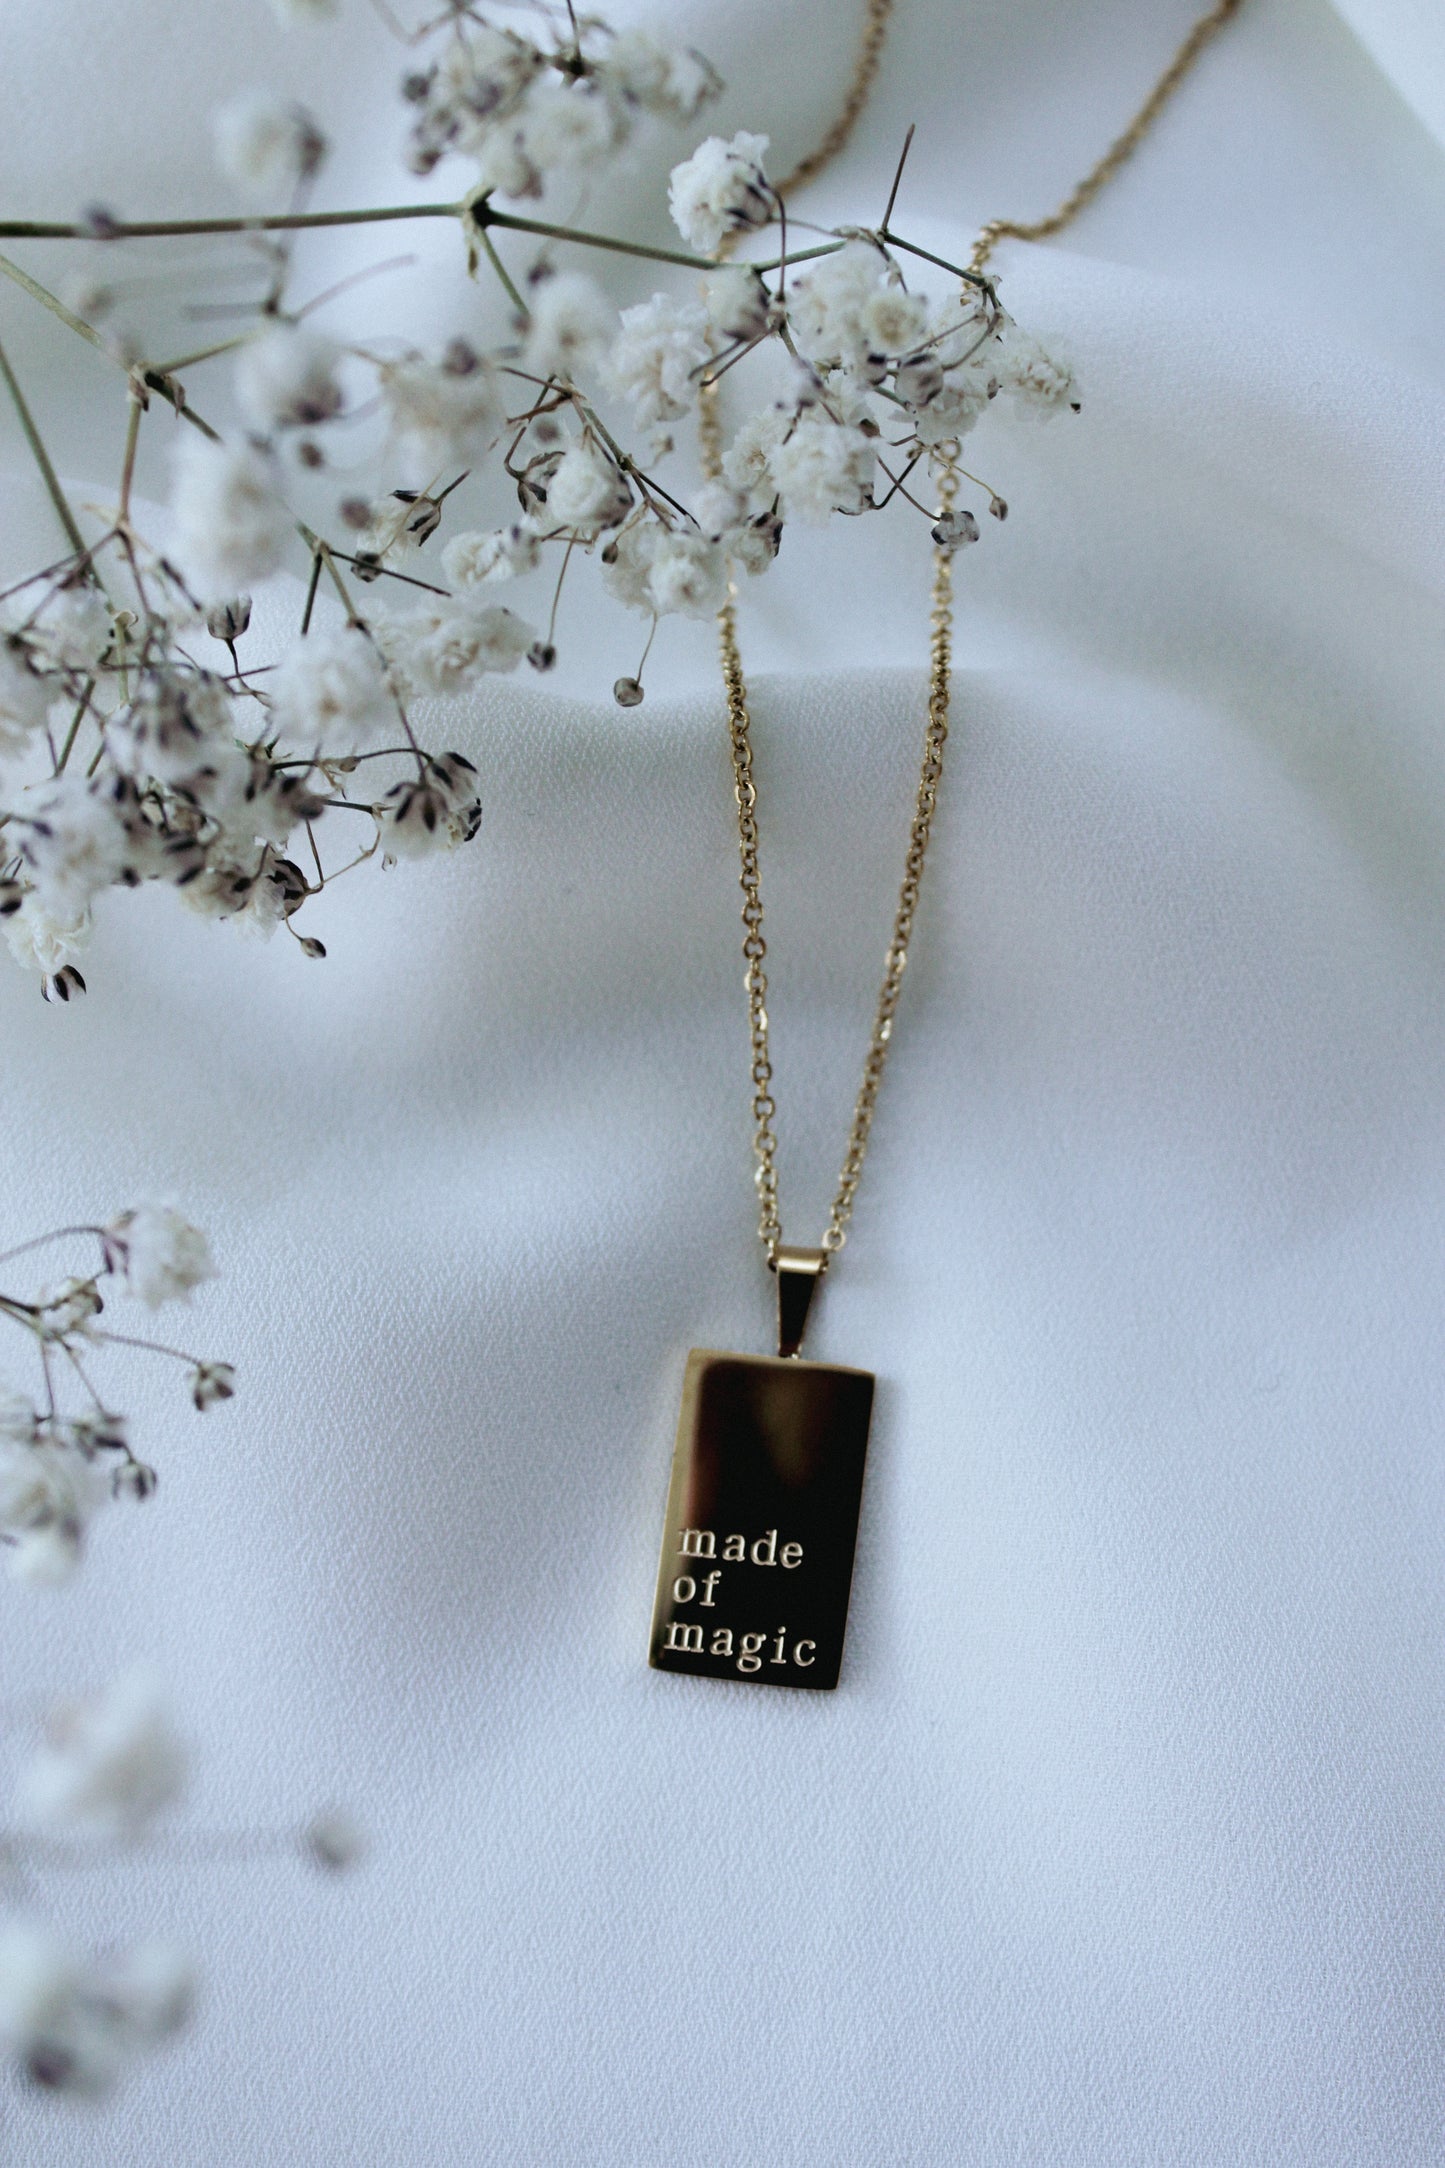 "Made of Magic" Necklace